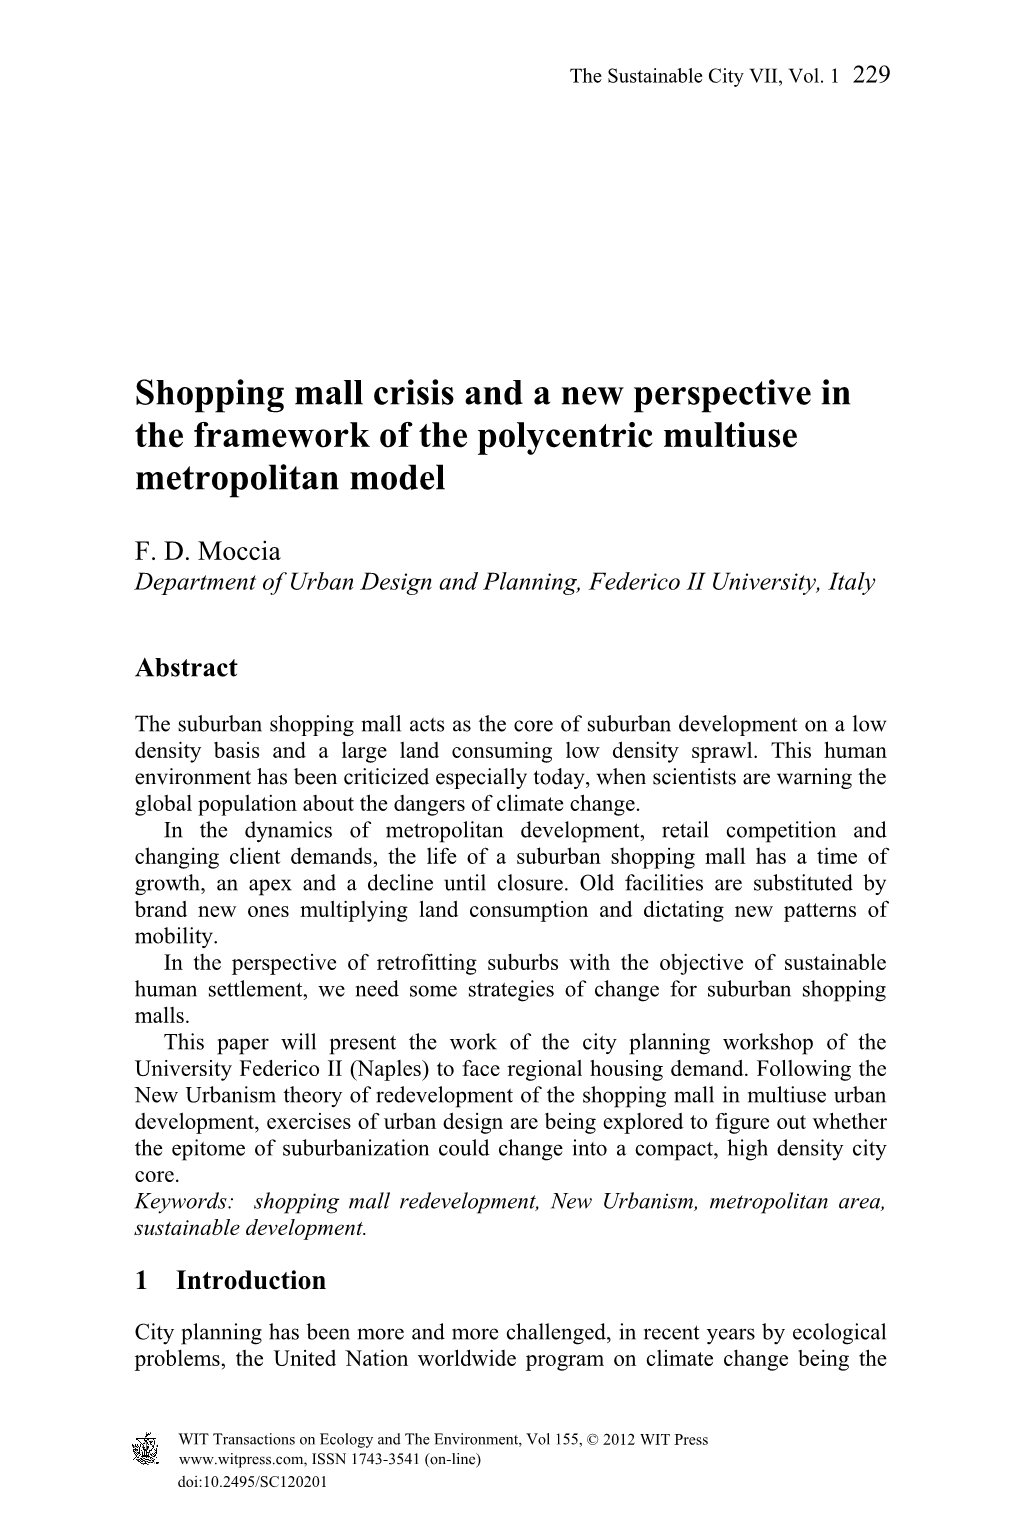 Shopping Mall Crisis and a New Perspective in the Framework of the Polycentric Multiuse Metropolitan Model